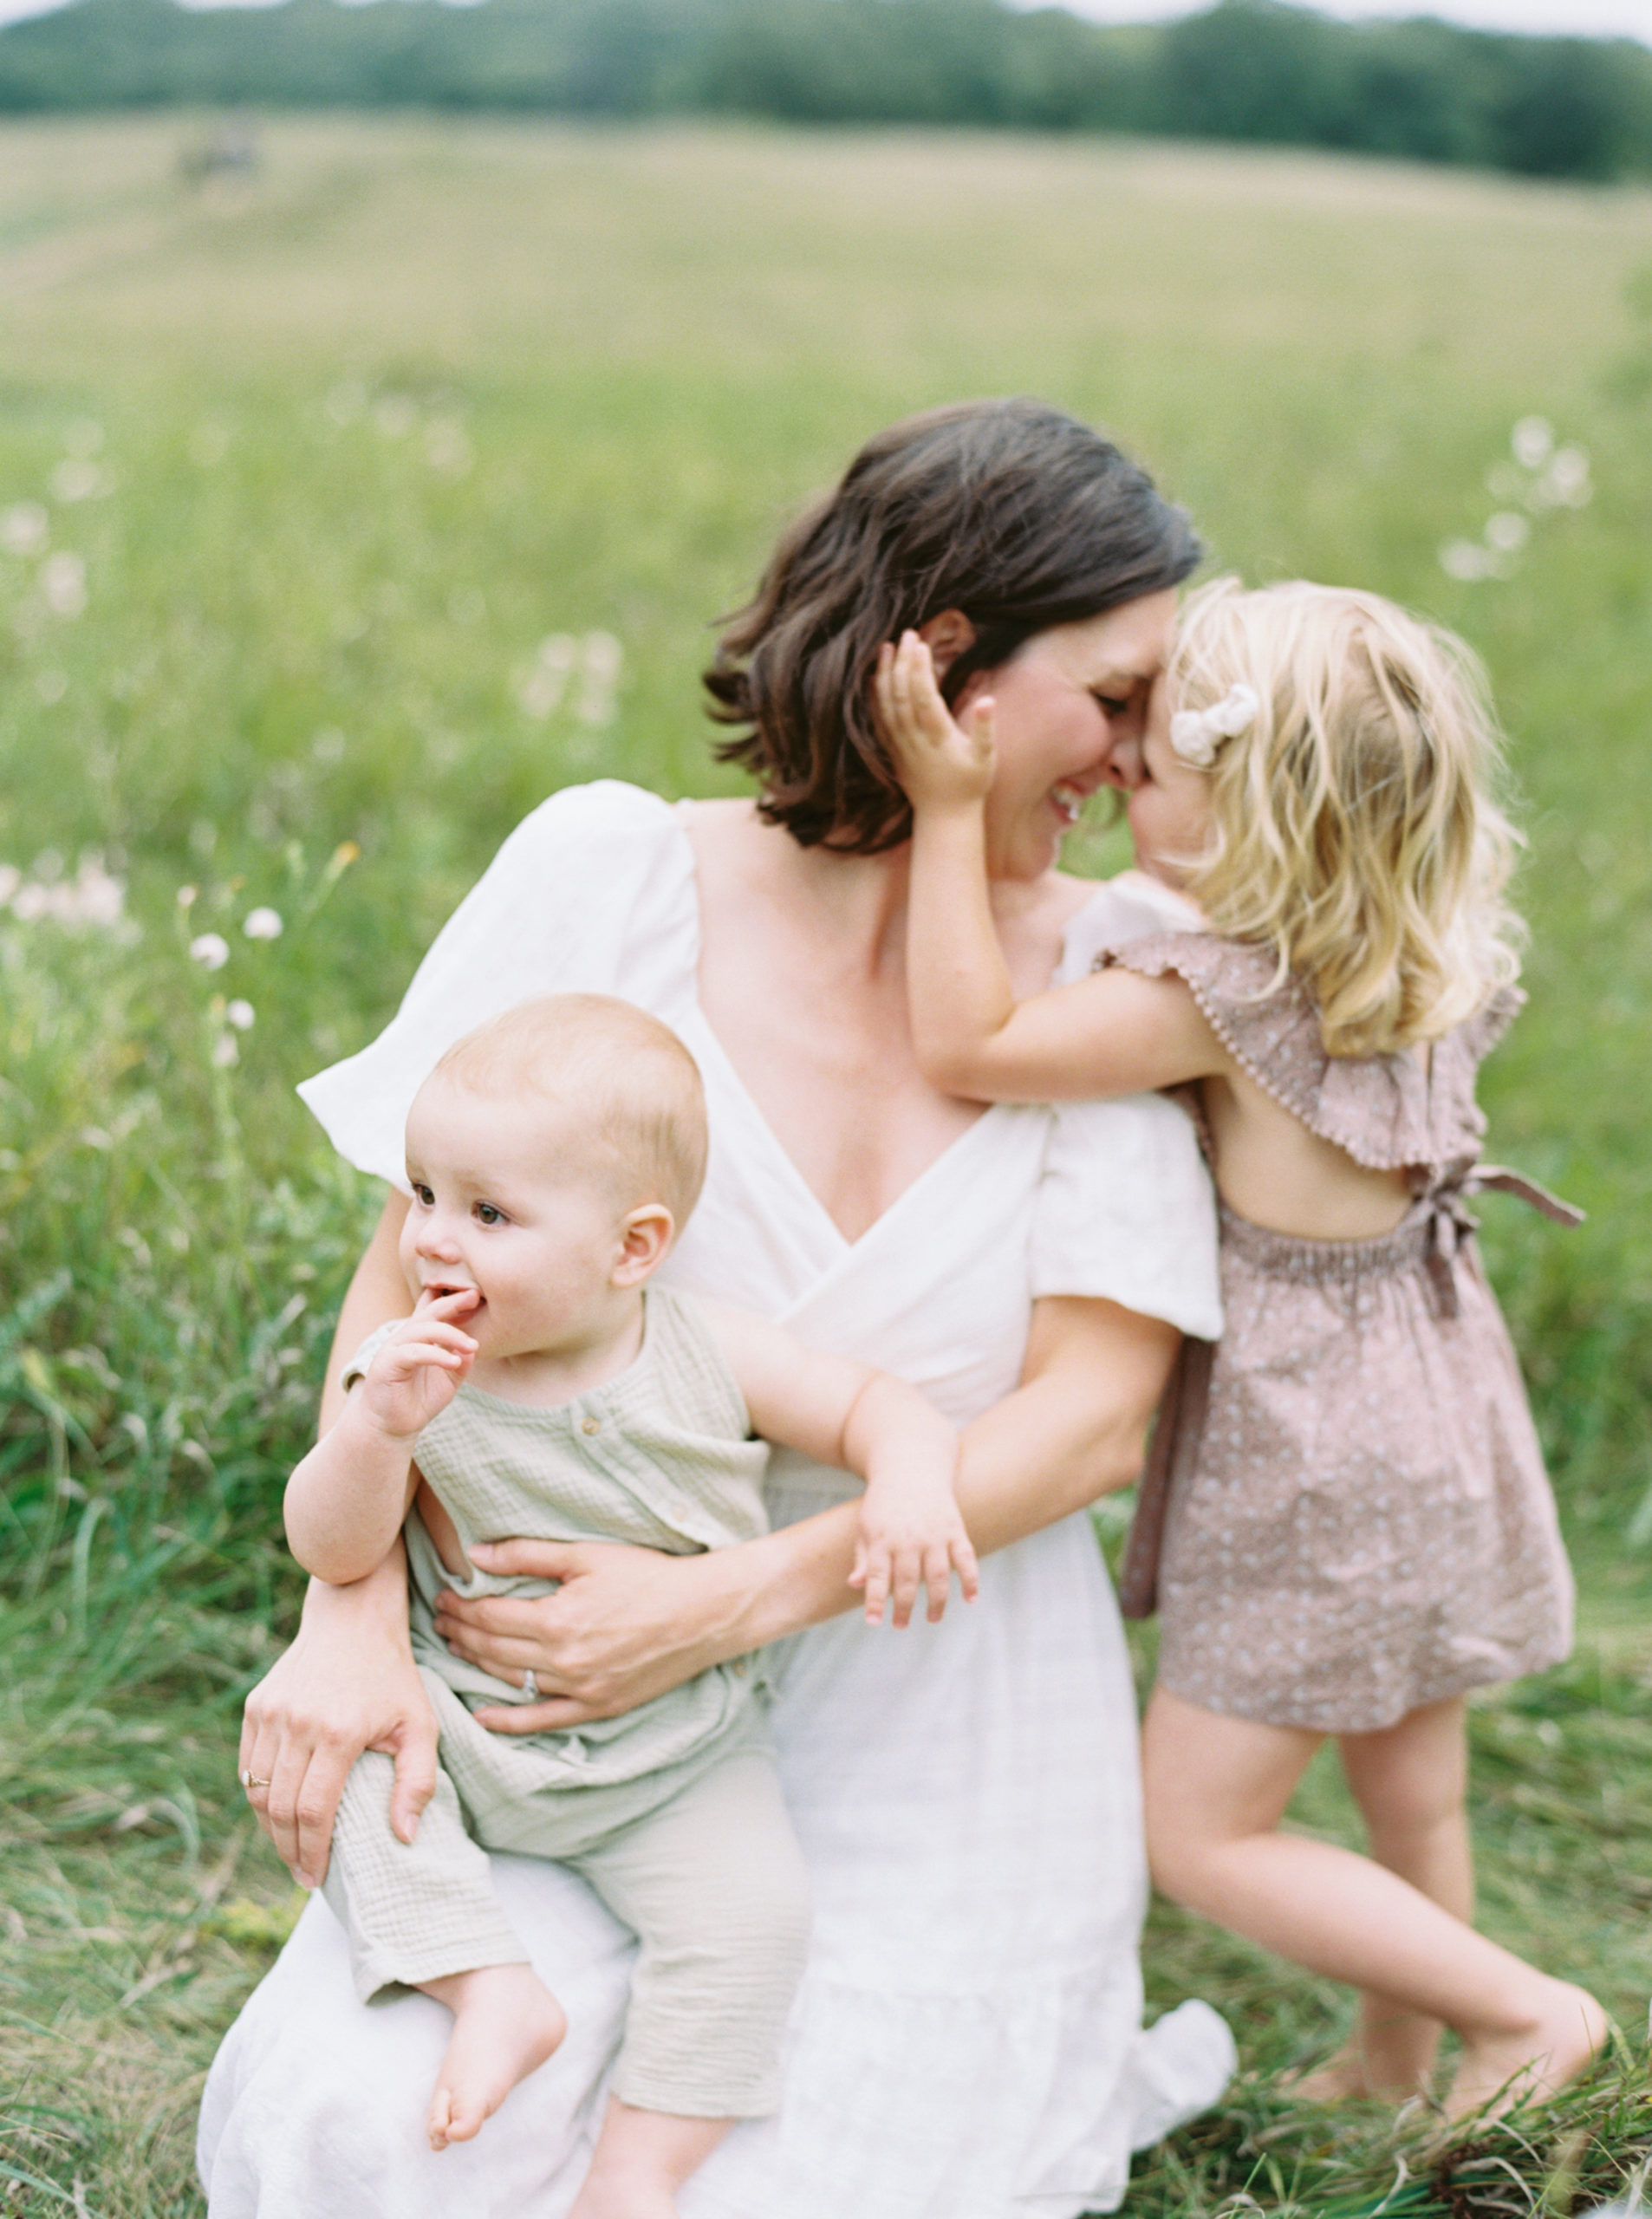 mother holding her baby in a grassy field for family portraits